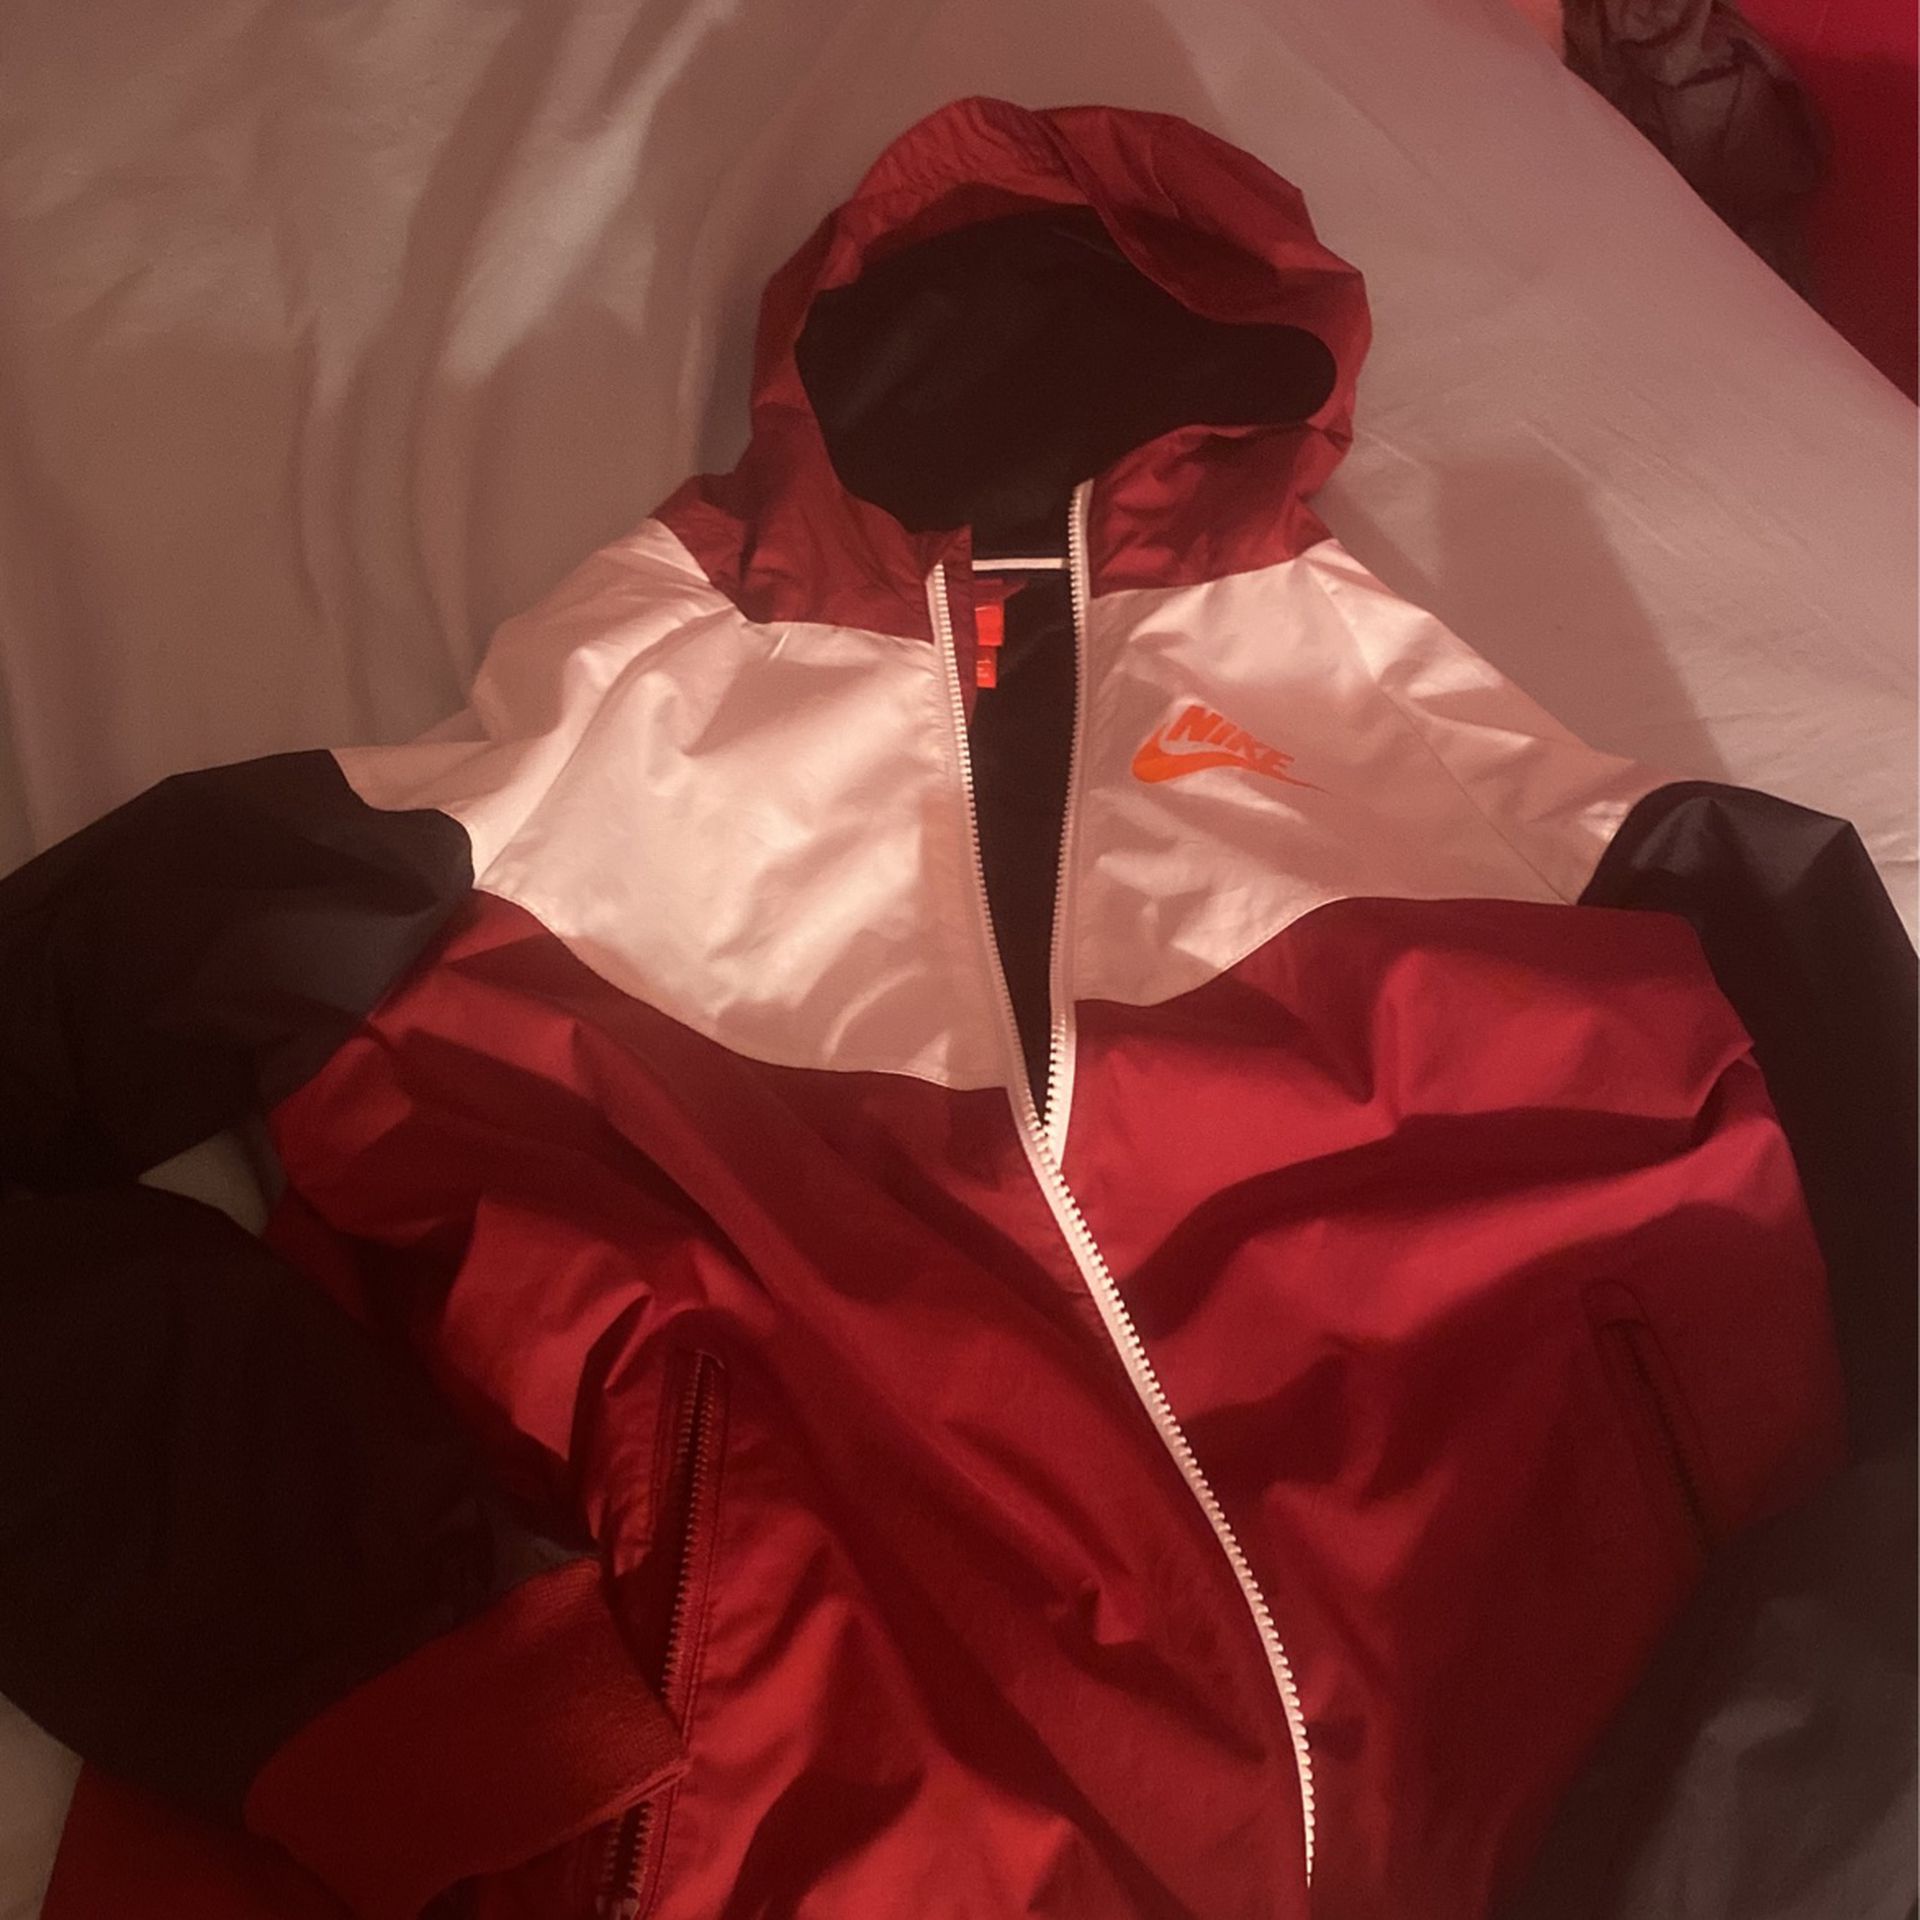 Nike Jacket Sizes Large But It Fit Like A Small 